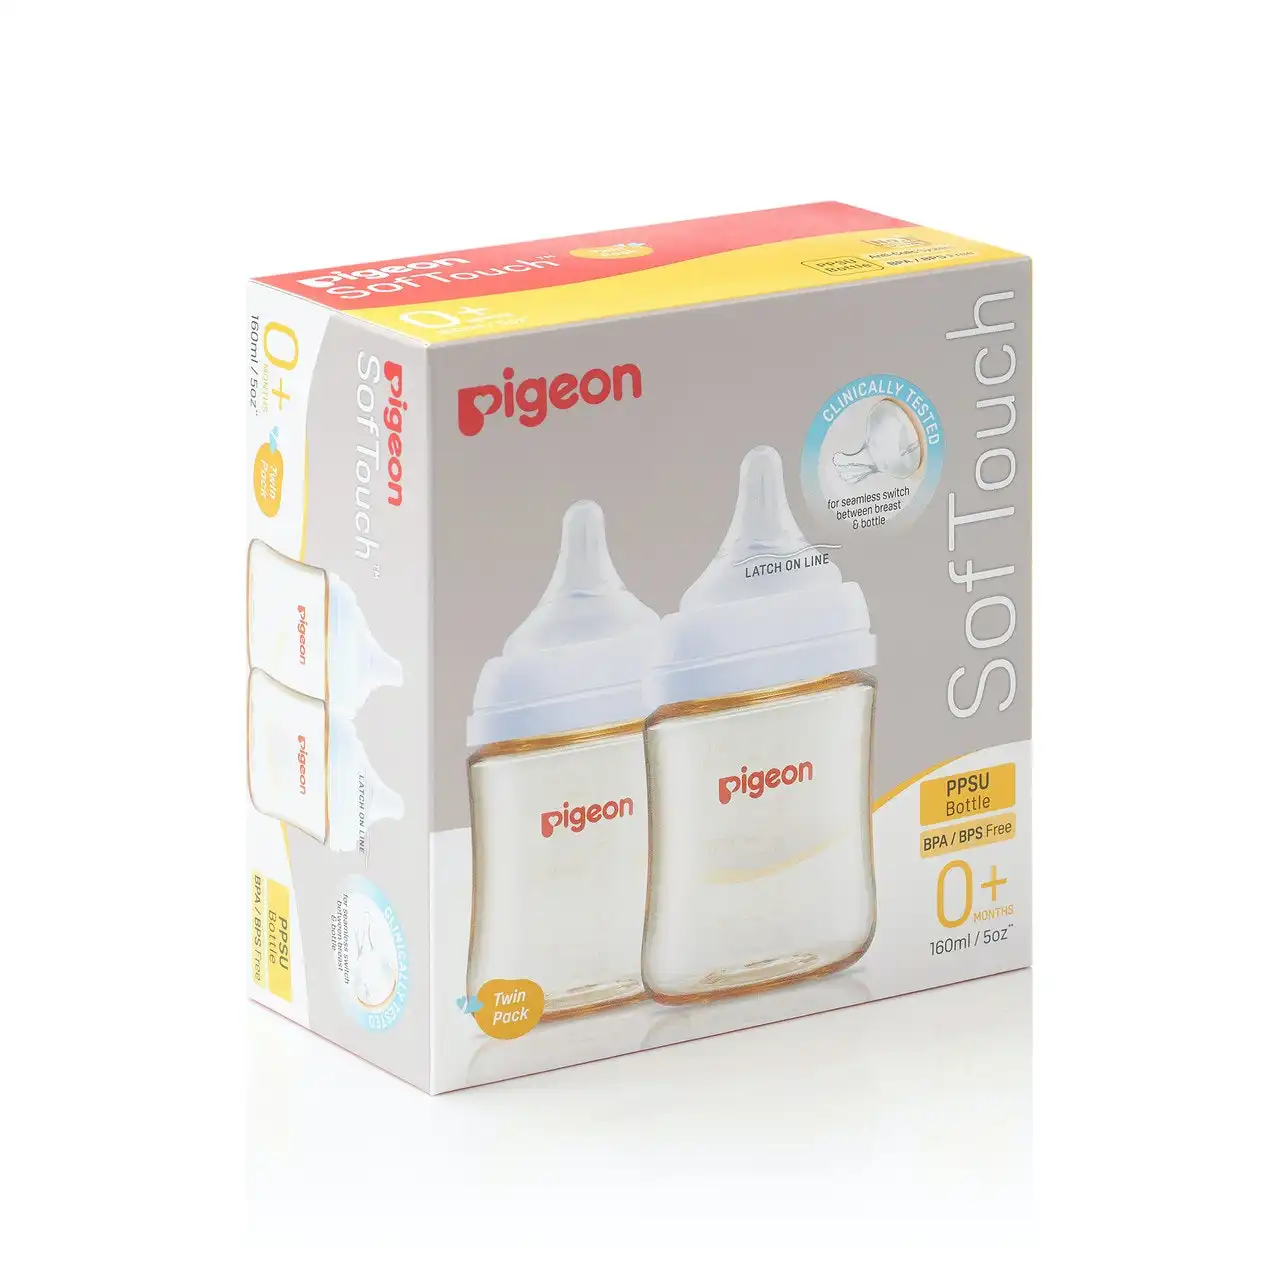 PIGEON Softouch Bottle PPSU Twin Pack 160ml